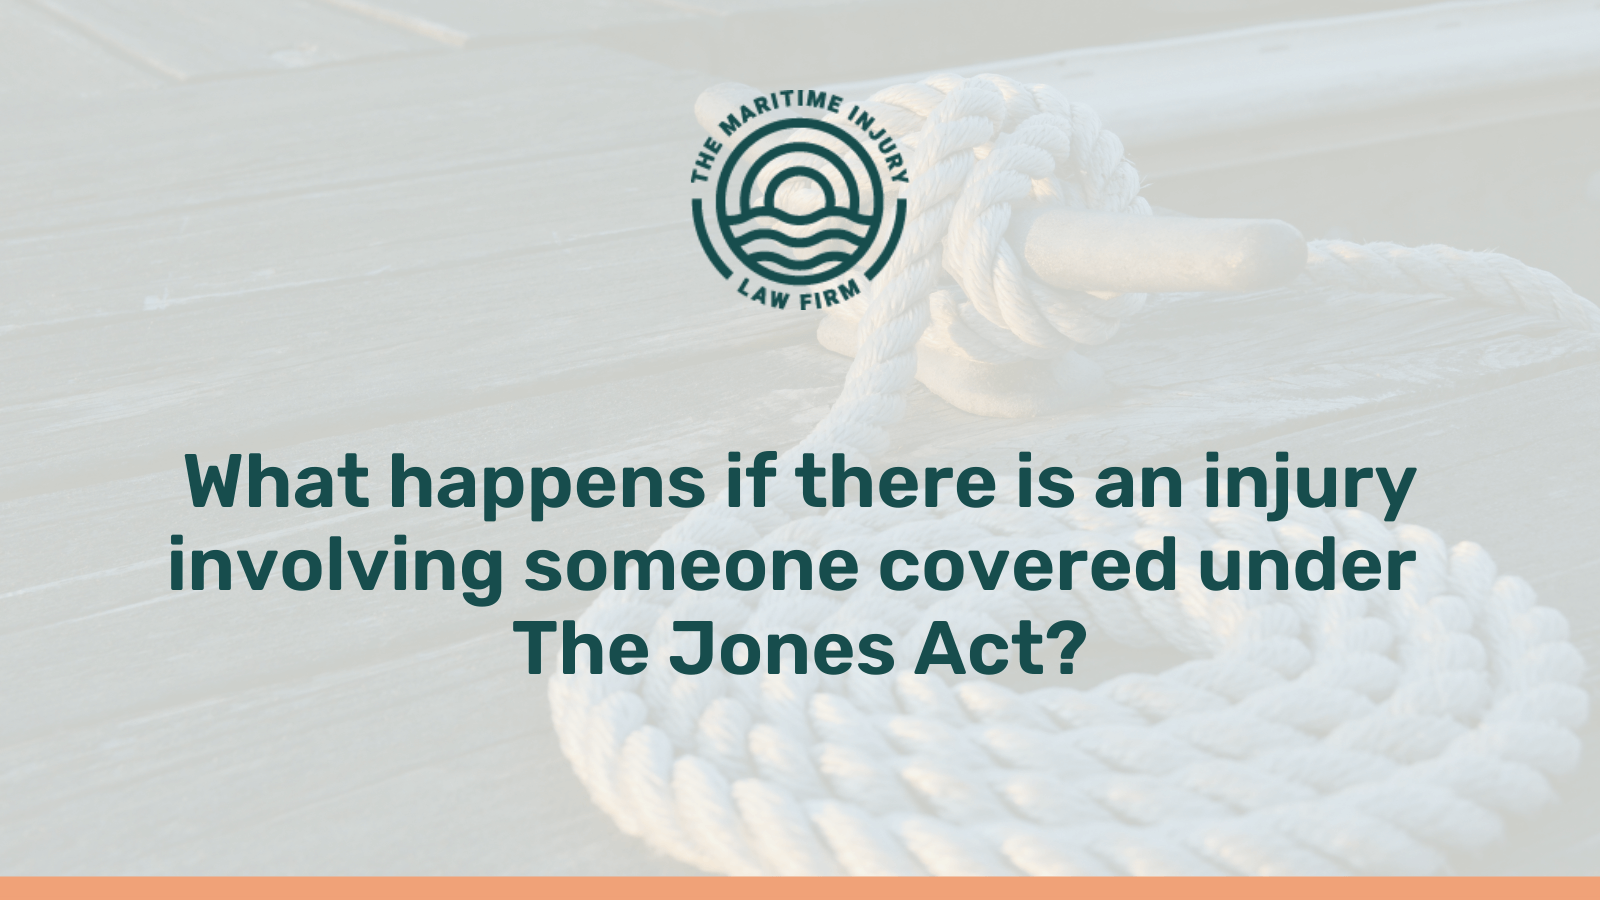 injury involving someone covered under The Jones Act - maritime injury law firm - George Vourvoulias